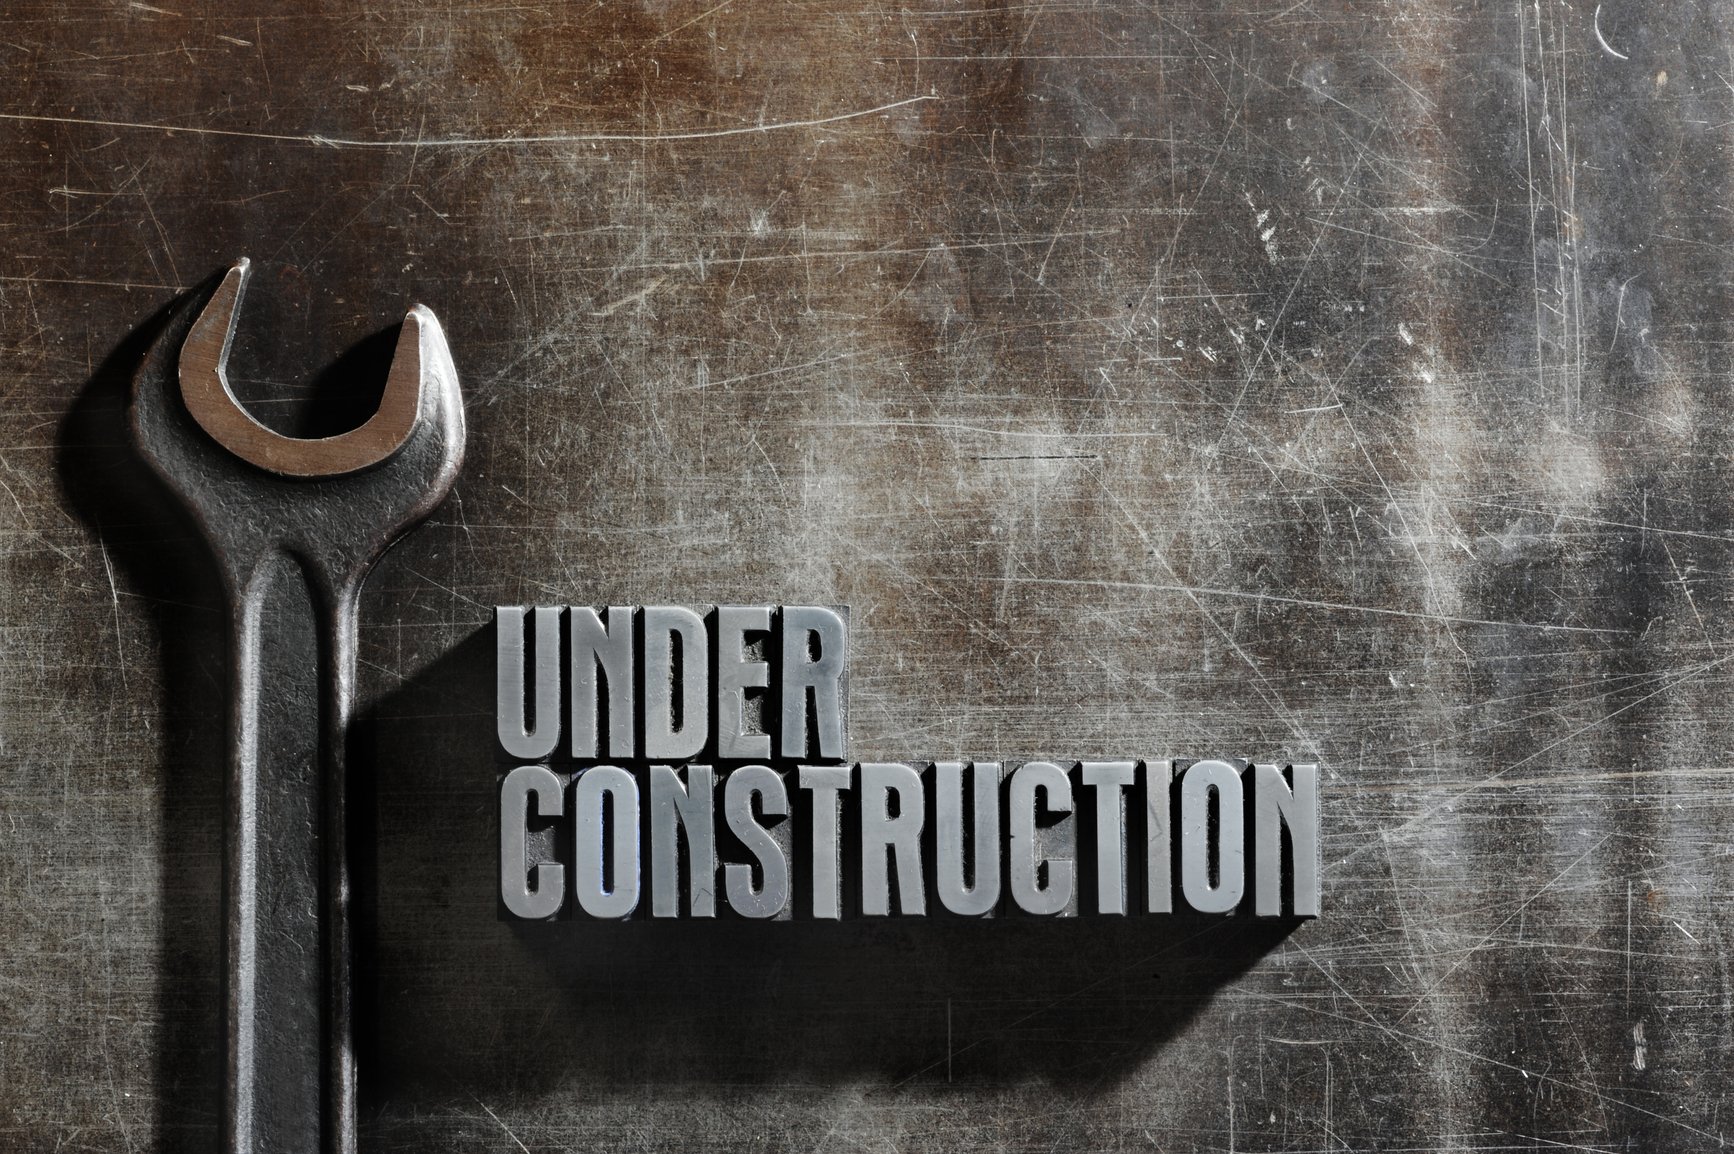 under, Construction, Sign, Work, Computer, Humor, Funny, Text ...
 Work Wallpaper 1366x768